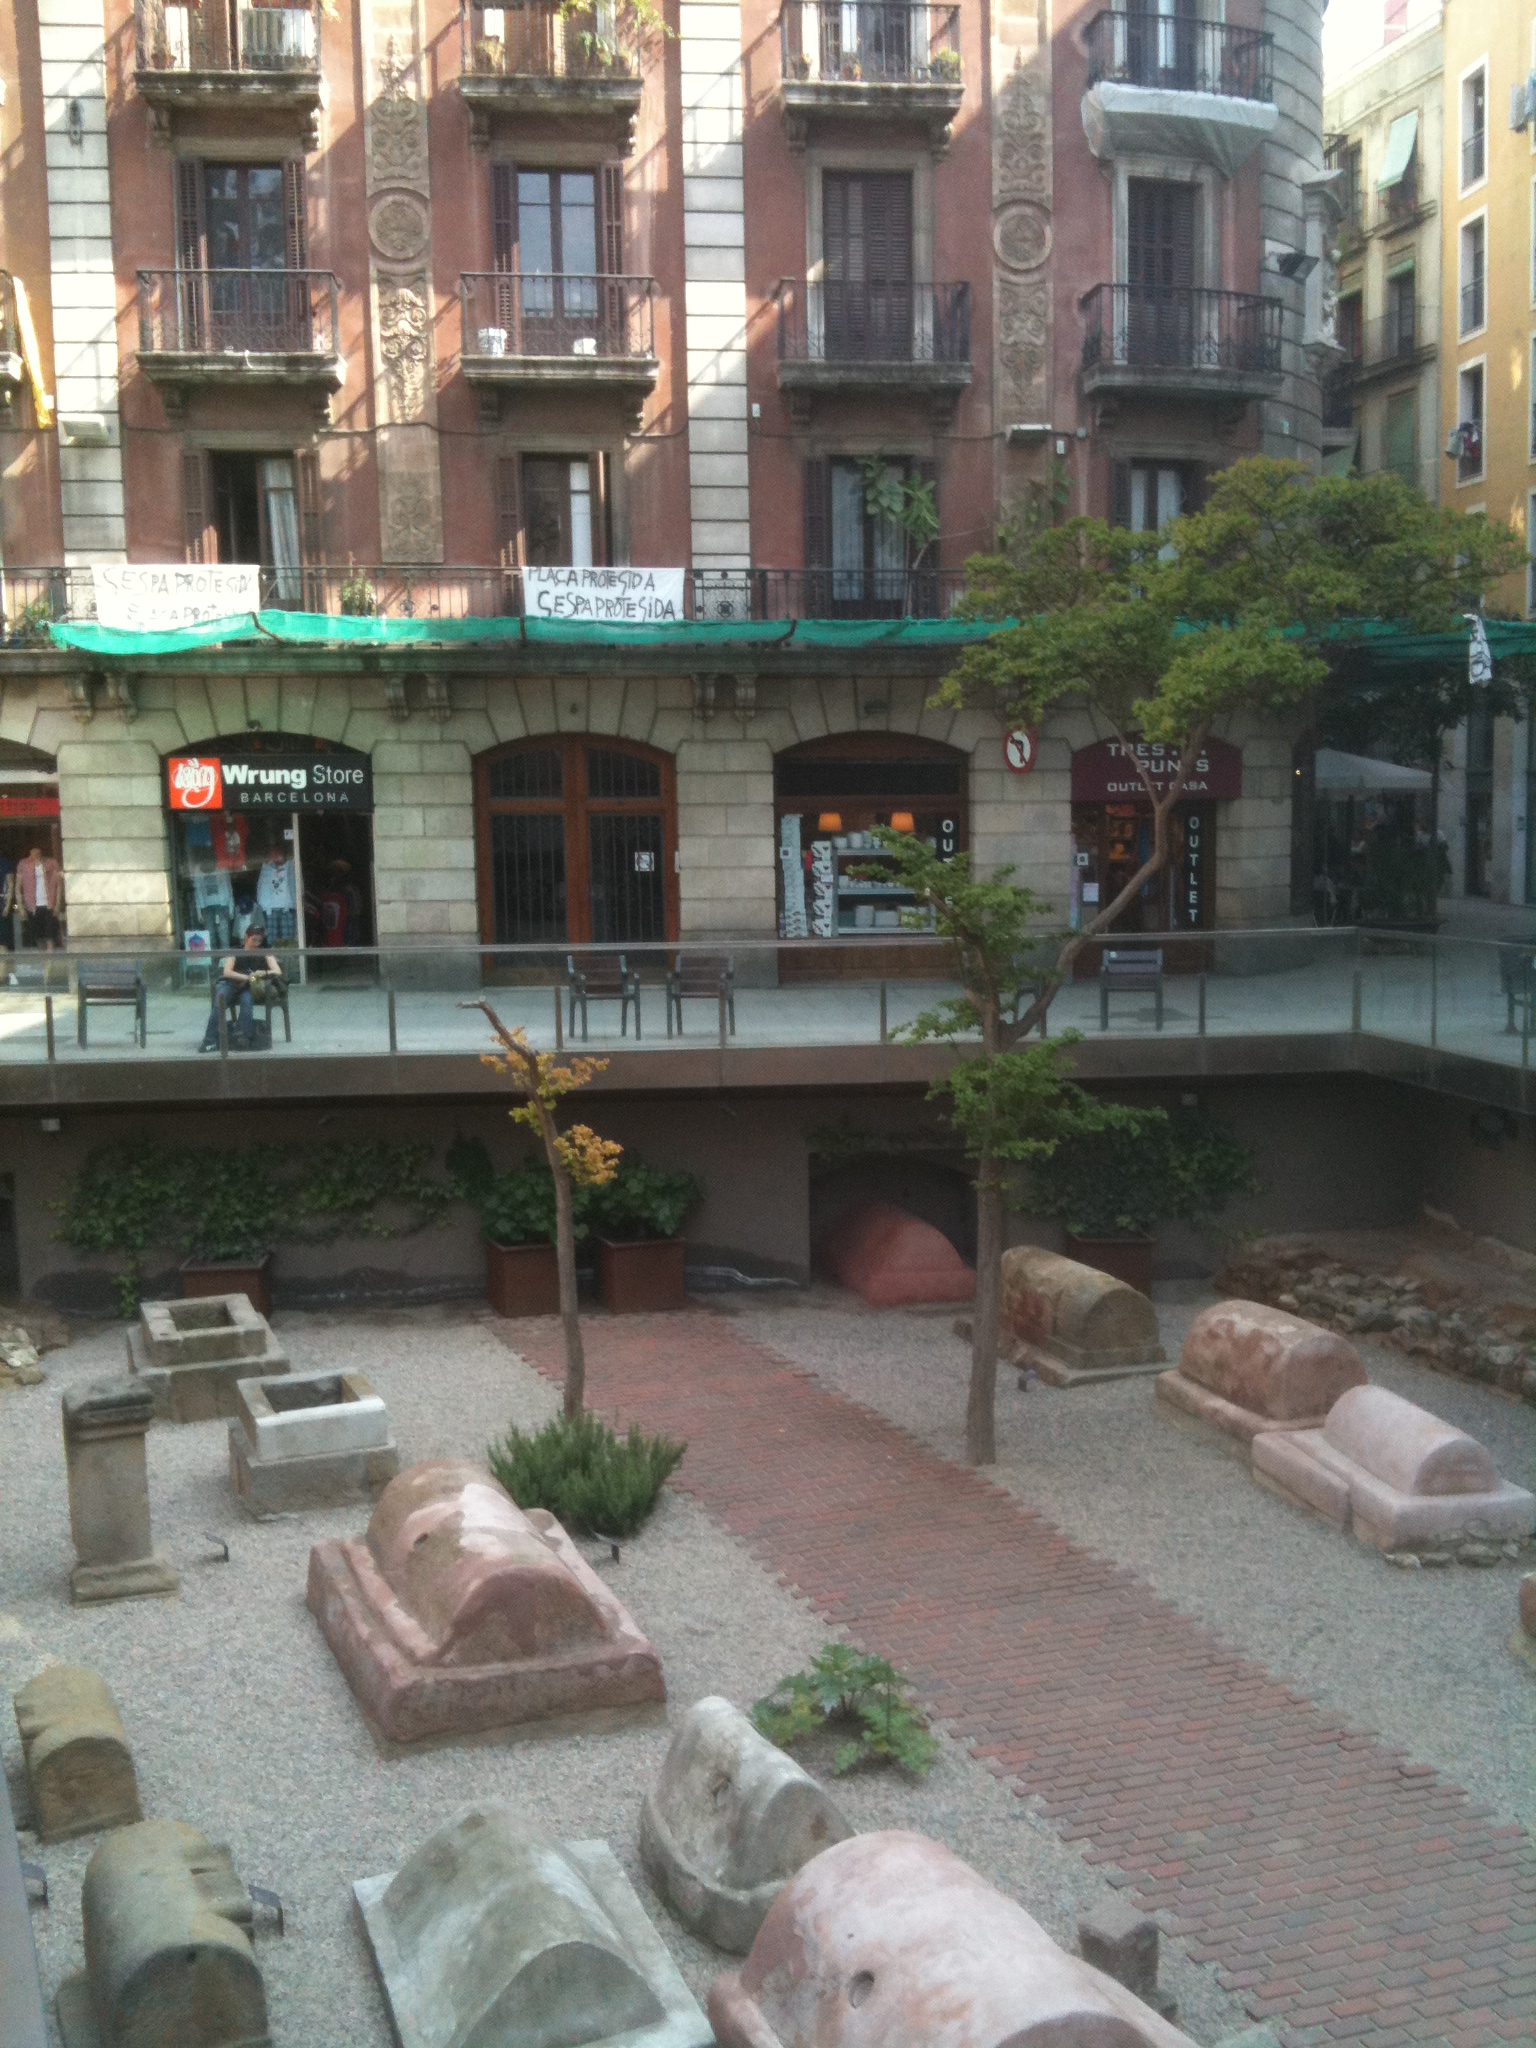 Roman Tombs in the heart of Barcelona